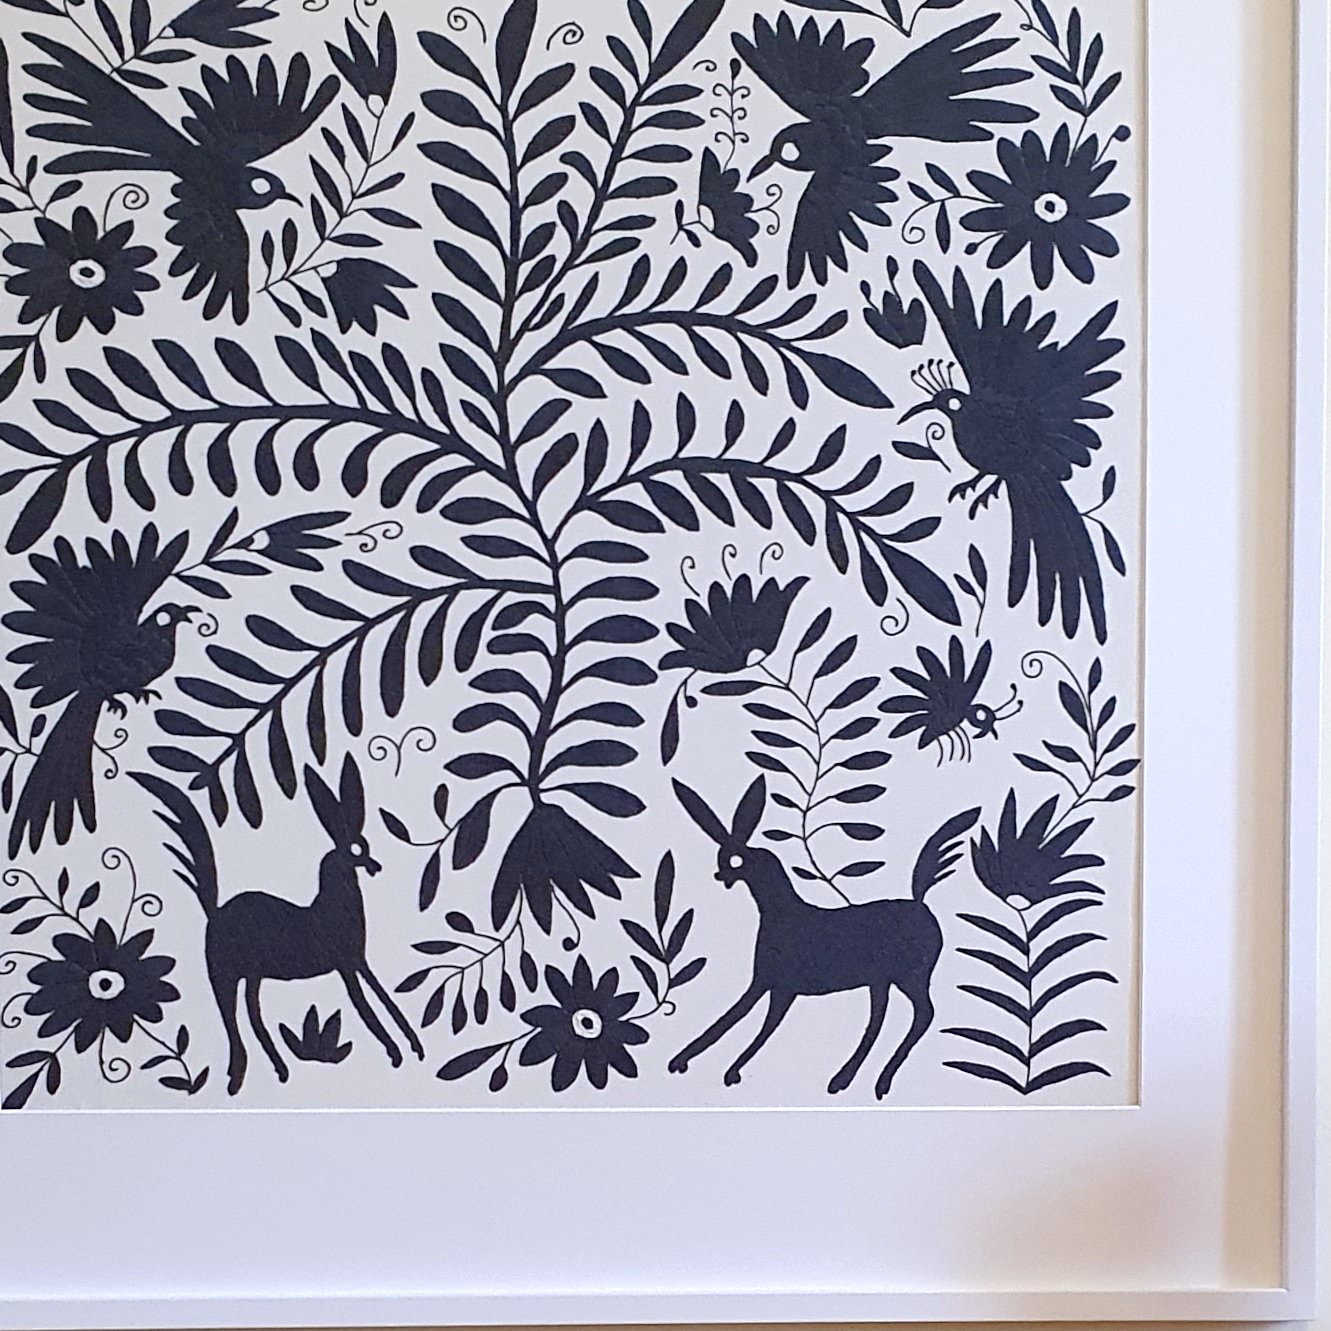 TEXTILE, Otomi Art, Otomi Artwork, Otomi Embroidery, Otomi, Otomi Gray, This Otomi was designed by an artist and fully hand embroidered by an embroider, descendant of the Otomi, in the region of Tenango de Doria, Mexico, with their traditional and famous